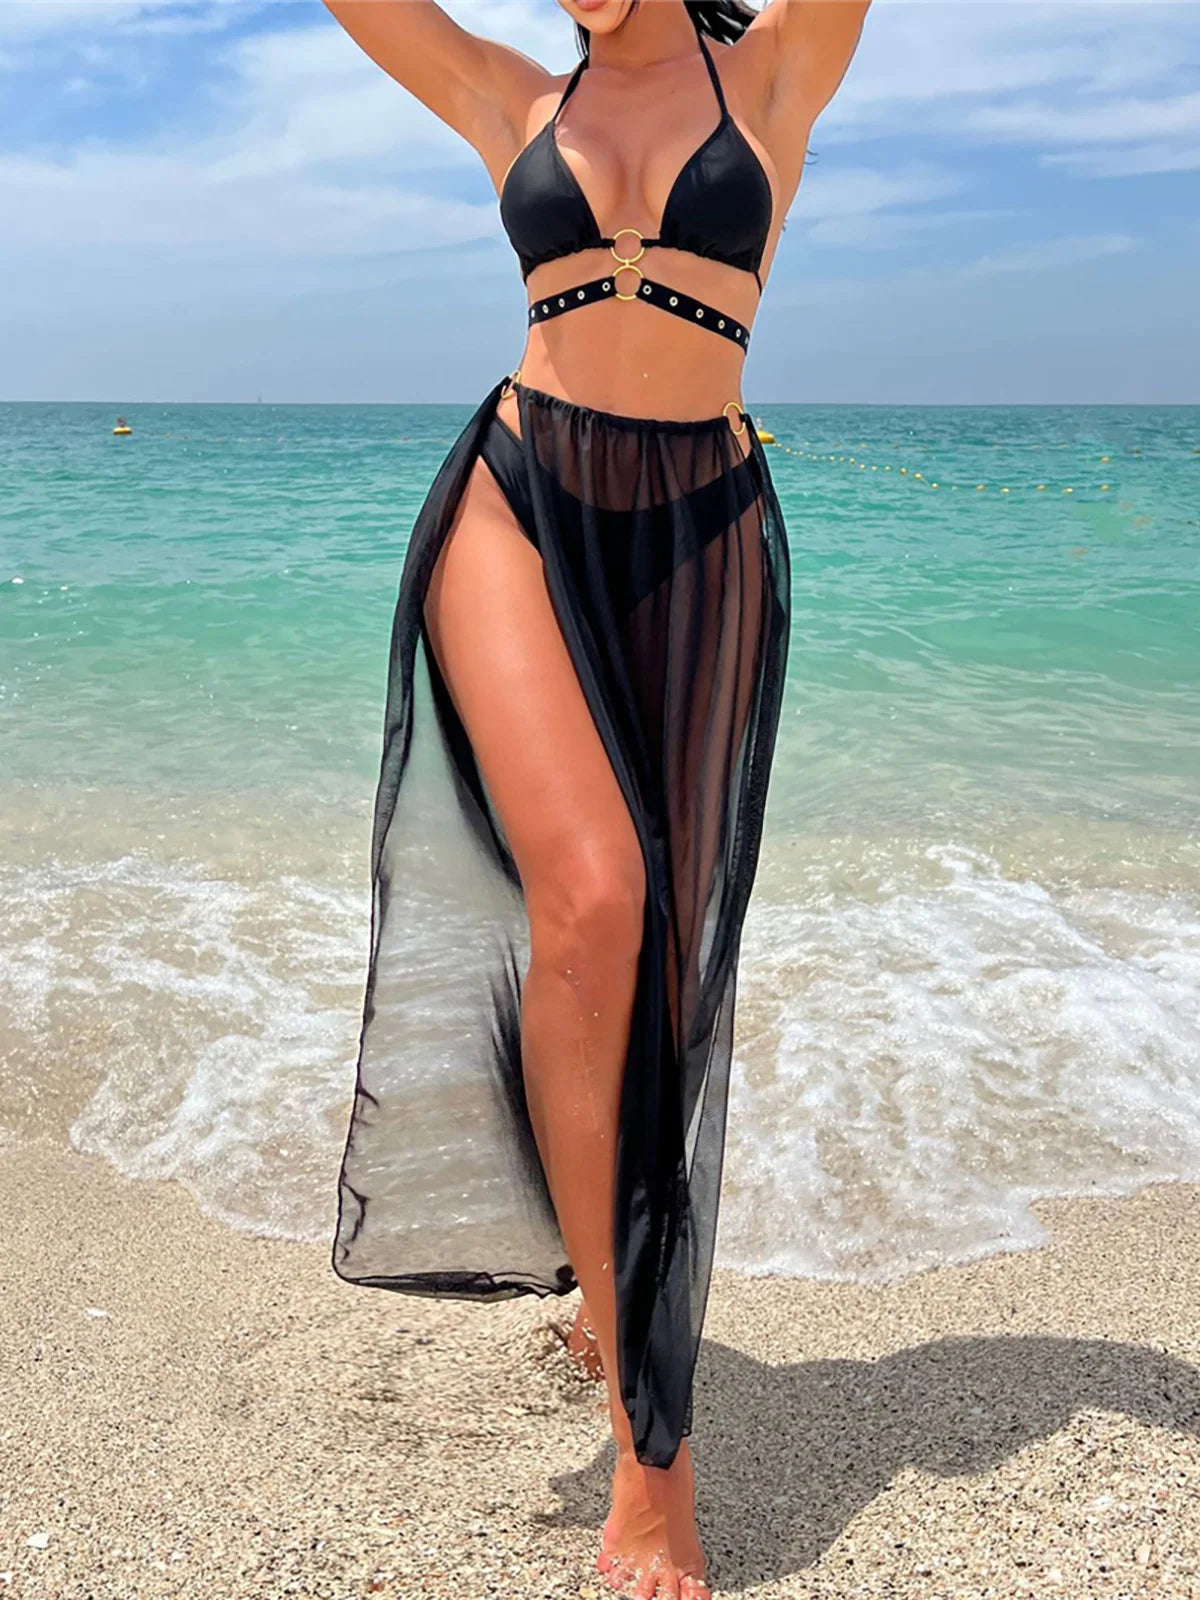 Halter Bikini Set with High Split Skirt, Three Piece Swimwear Ensemble, Made of Nylon and Spandex, Solid Black, Wire-Free Support, Low Waist Design, True to Size, Women's Bikini Set, Comes with Padding, Available in Sizes Small, Medium, Large, Free Shipping.